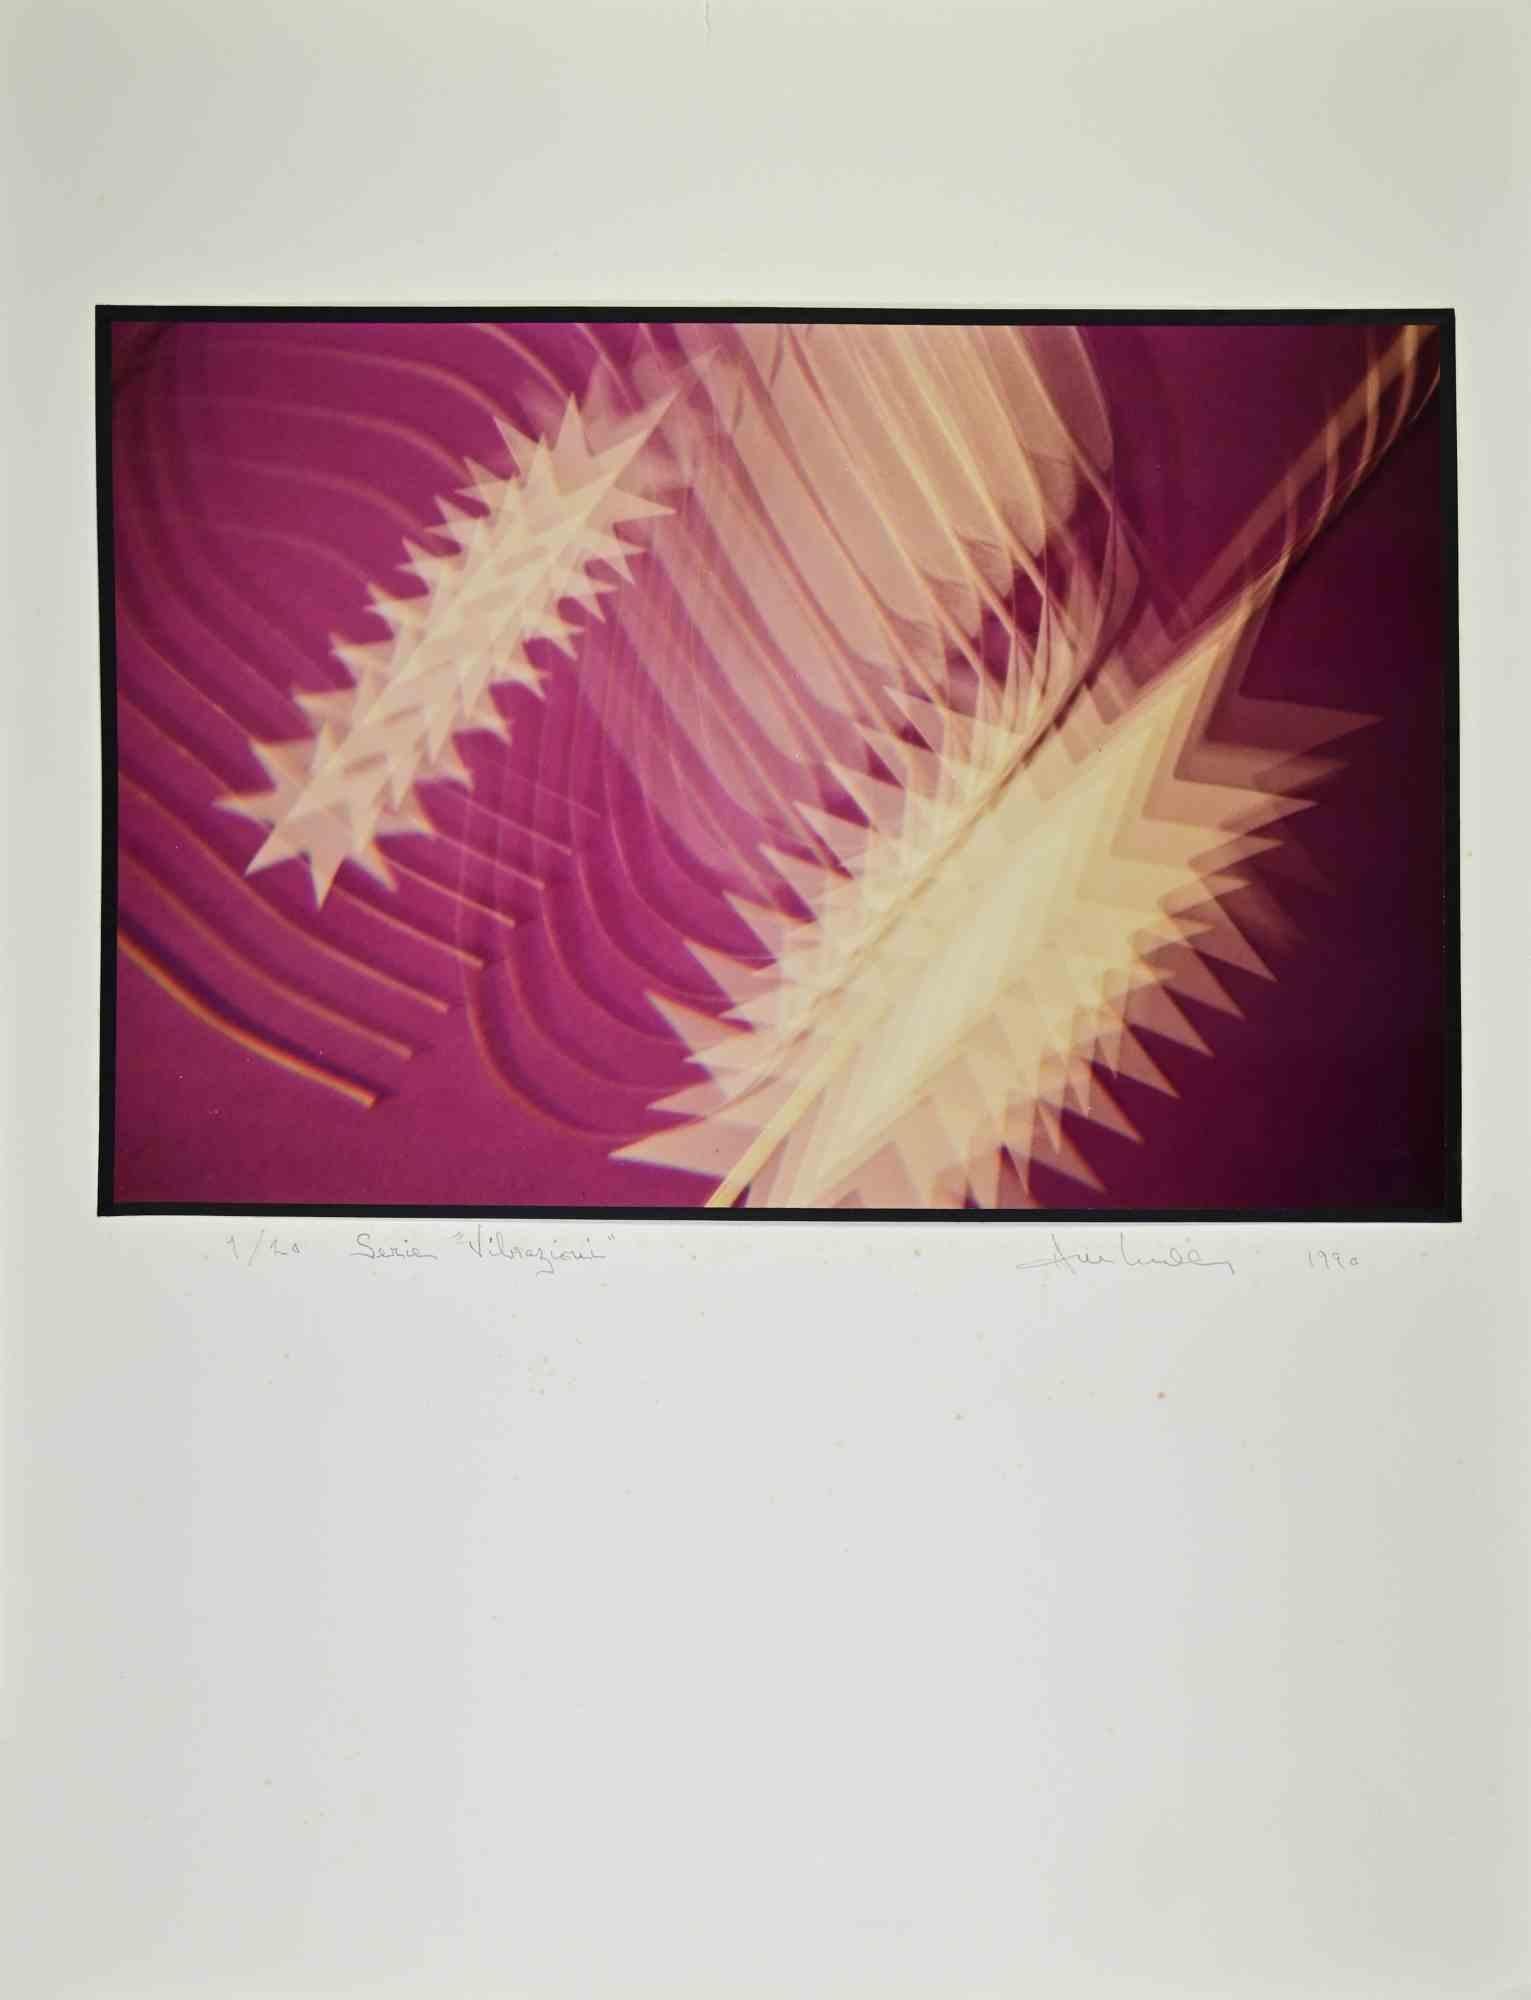 Exhibition print from “ Vibrazioni”  is a vintage photographic print on color paper applied on cardboard realized by Harold Miller Null in 1990. 

Hand-signed and dated on the lower right margin. 

Print performed for personal exposition in Ferrara